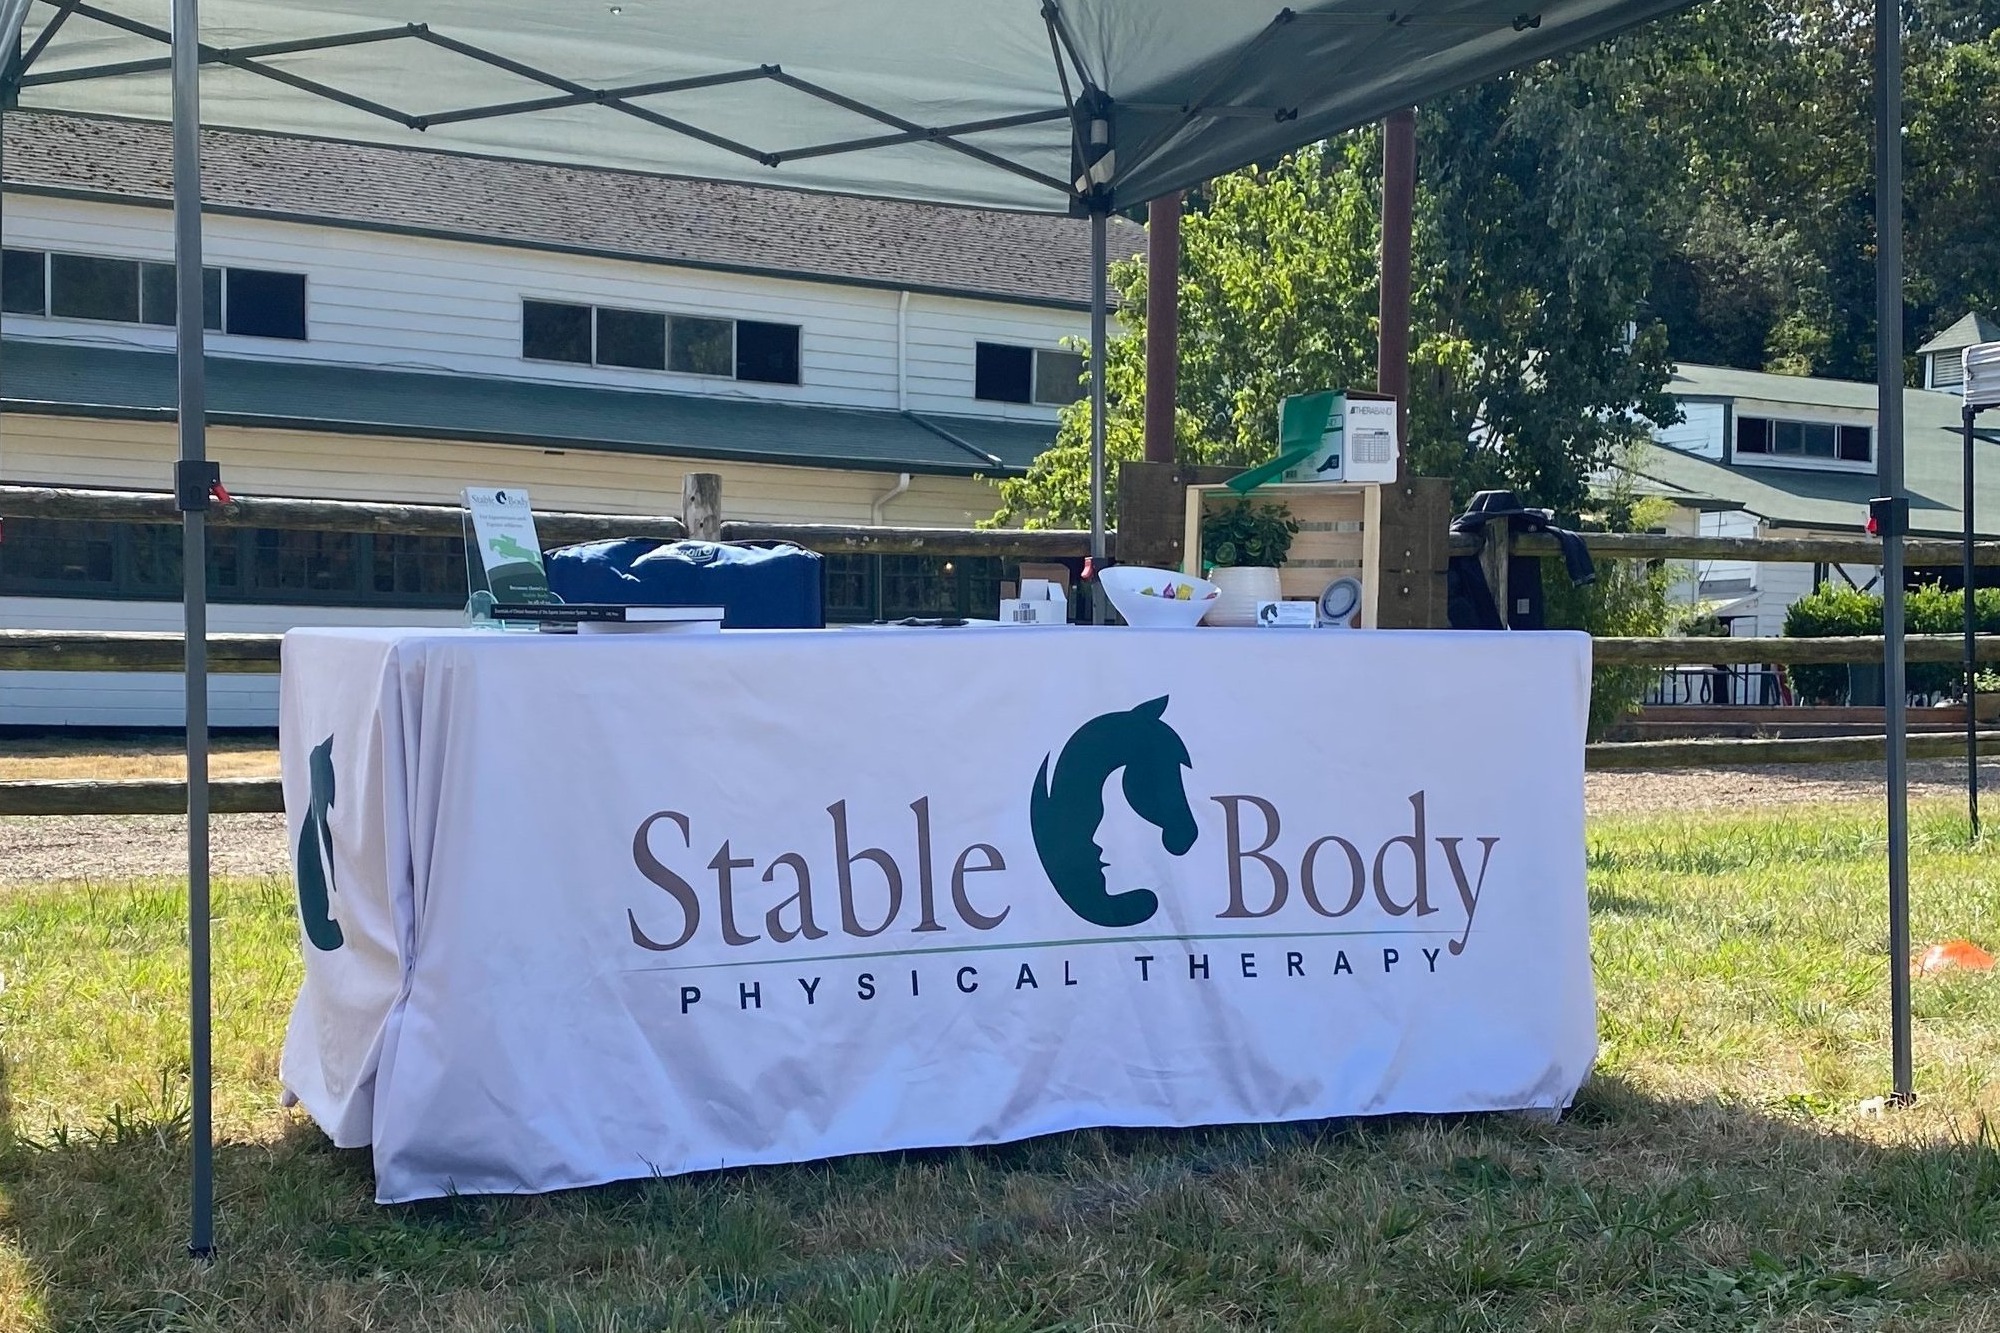 Stable Body Physical Therapy - Michelle Correia-Jeffers - Beaverton, OR - clinic show support